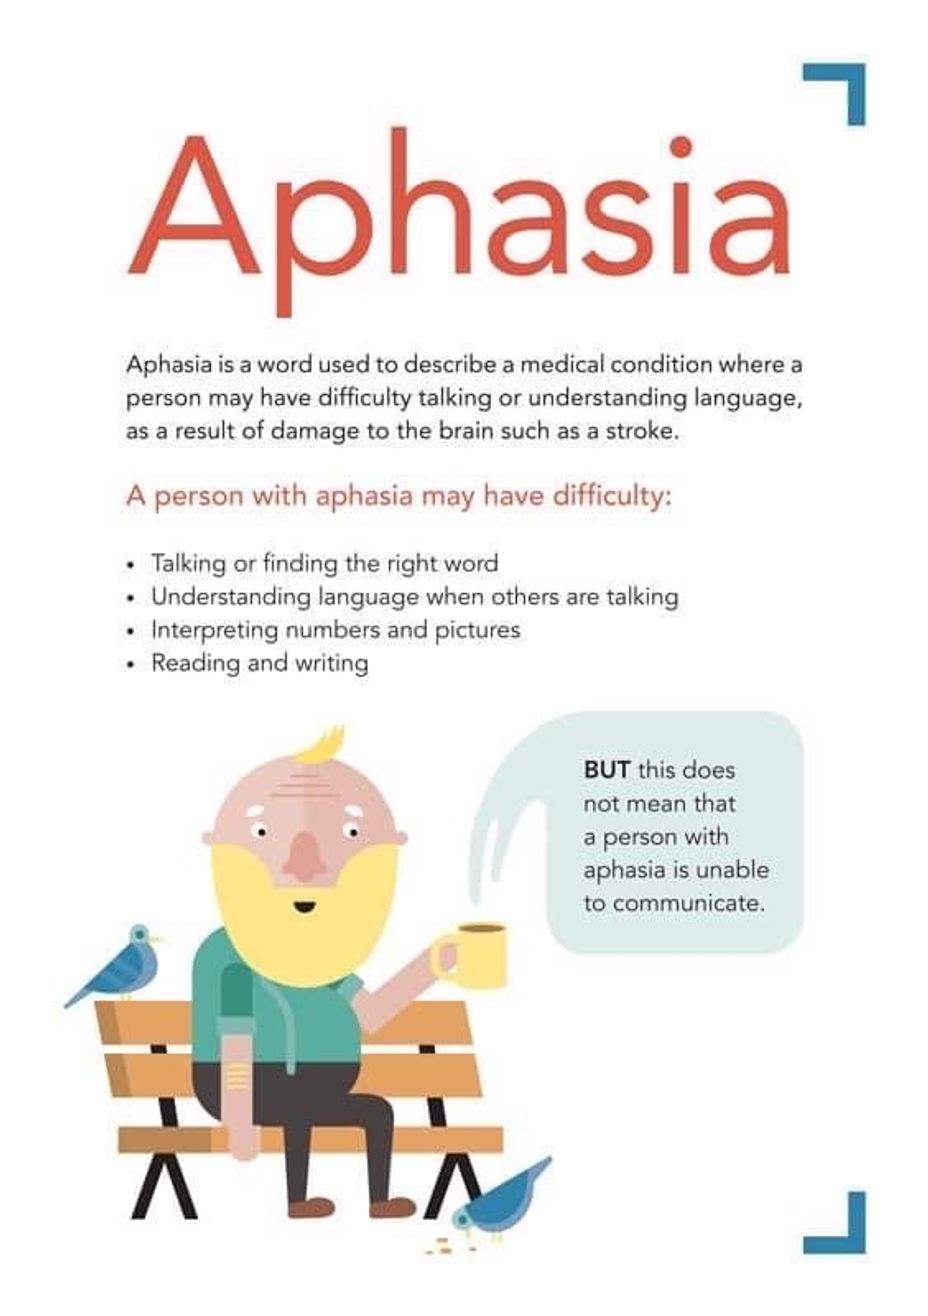 <p>## Shout <a href="https://themighty.com/topic/aphasia/?label=Aphasia" class="tm-embed-link  tm-autolink health-map" data-id="5b23ce6000553f33fe98d329" data-name="Aphasia" title="Aphasia" target="_blank">Aphasia</a> <a href="https://themighty.com/topic/aphasia/?label=Aphasia" class="tm-embed-link  tm-autolink health-map" data-id="5b23ce6000553f33fe98d329" data-name="Aphasia" title="Aphasia" target="_blank">Aphasia</a></link></p>